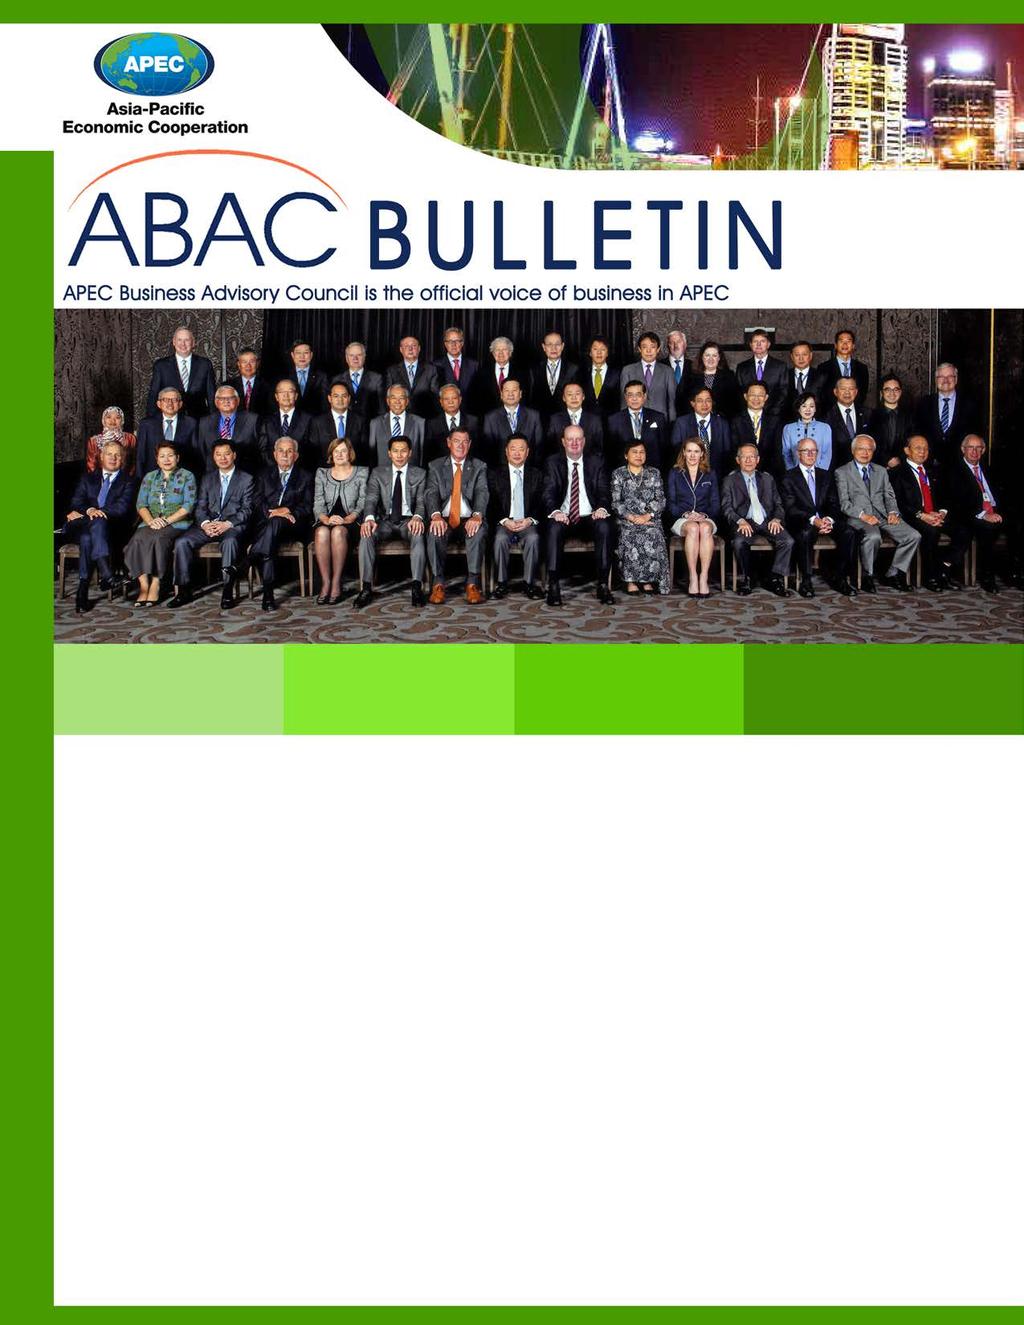 1st Quarter 2014 The official Newsletter of ABAC 4-7 May ABAC II Santiago, Chile 7-10 July ABAC III Seattle, USA 4-7 November ABAC IV Beijing, China 8-10 November APEC CEO Summit Beijing, China The